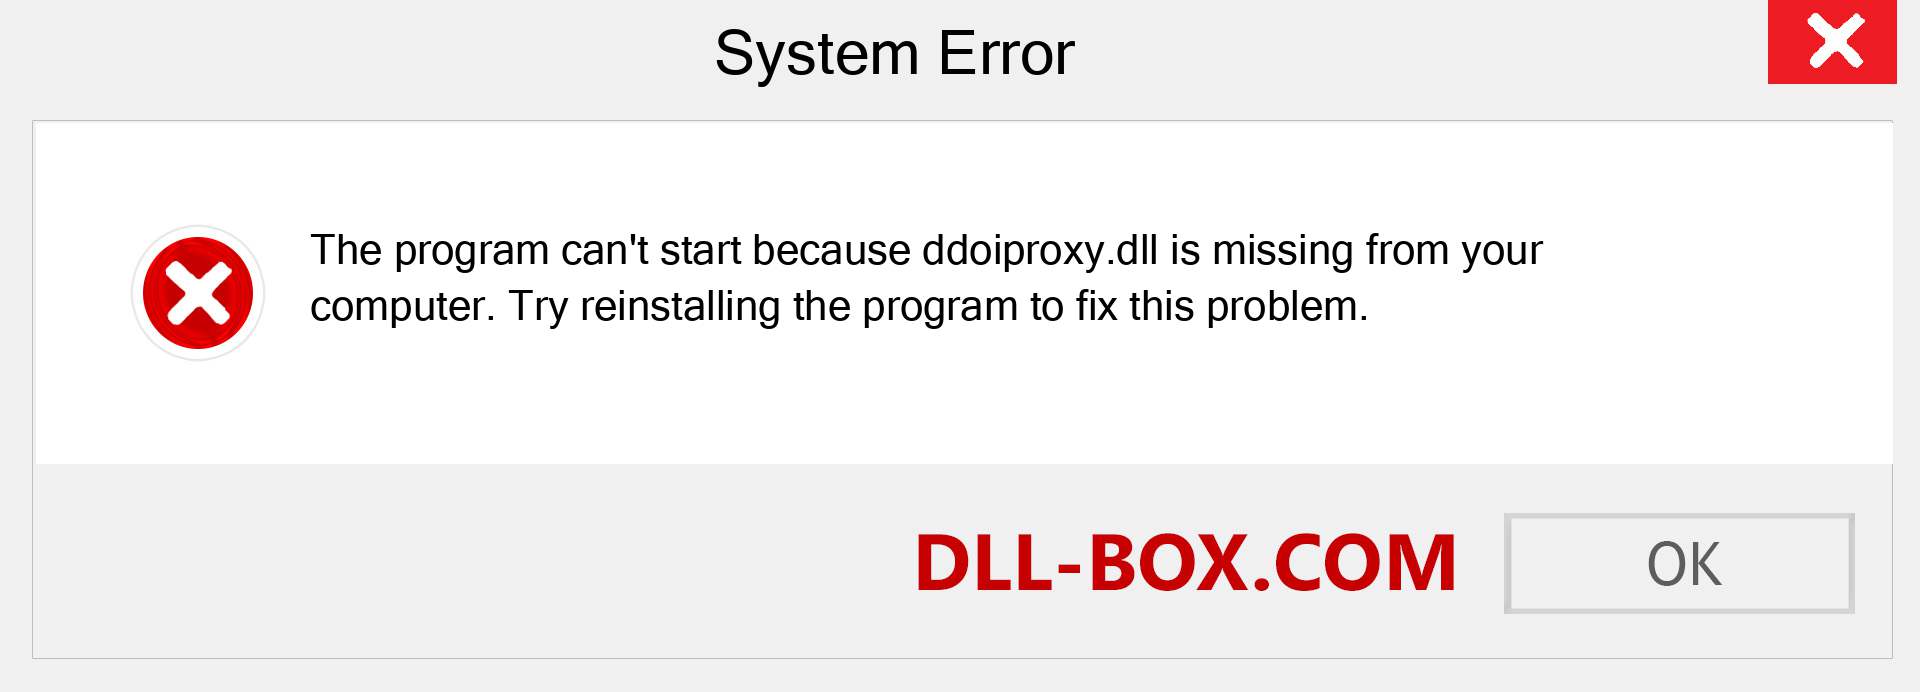  ddoiproxy.dll file is missing?. Download for Windows 7, 8, 10 - Fix  ddoiproxy dll Missing Error on Windows, photos, images